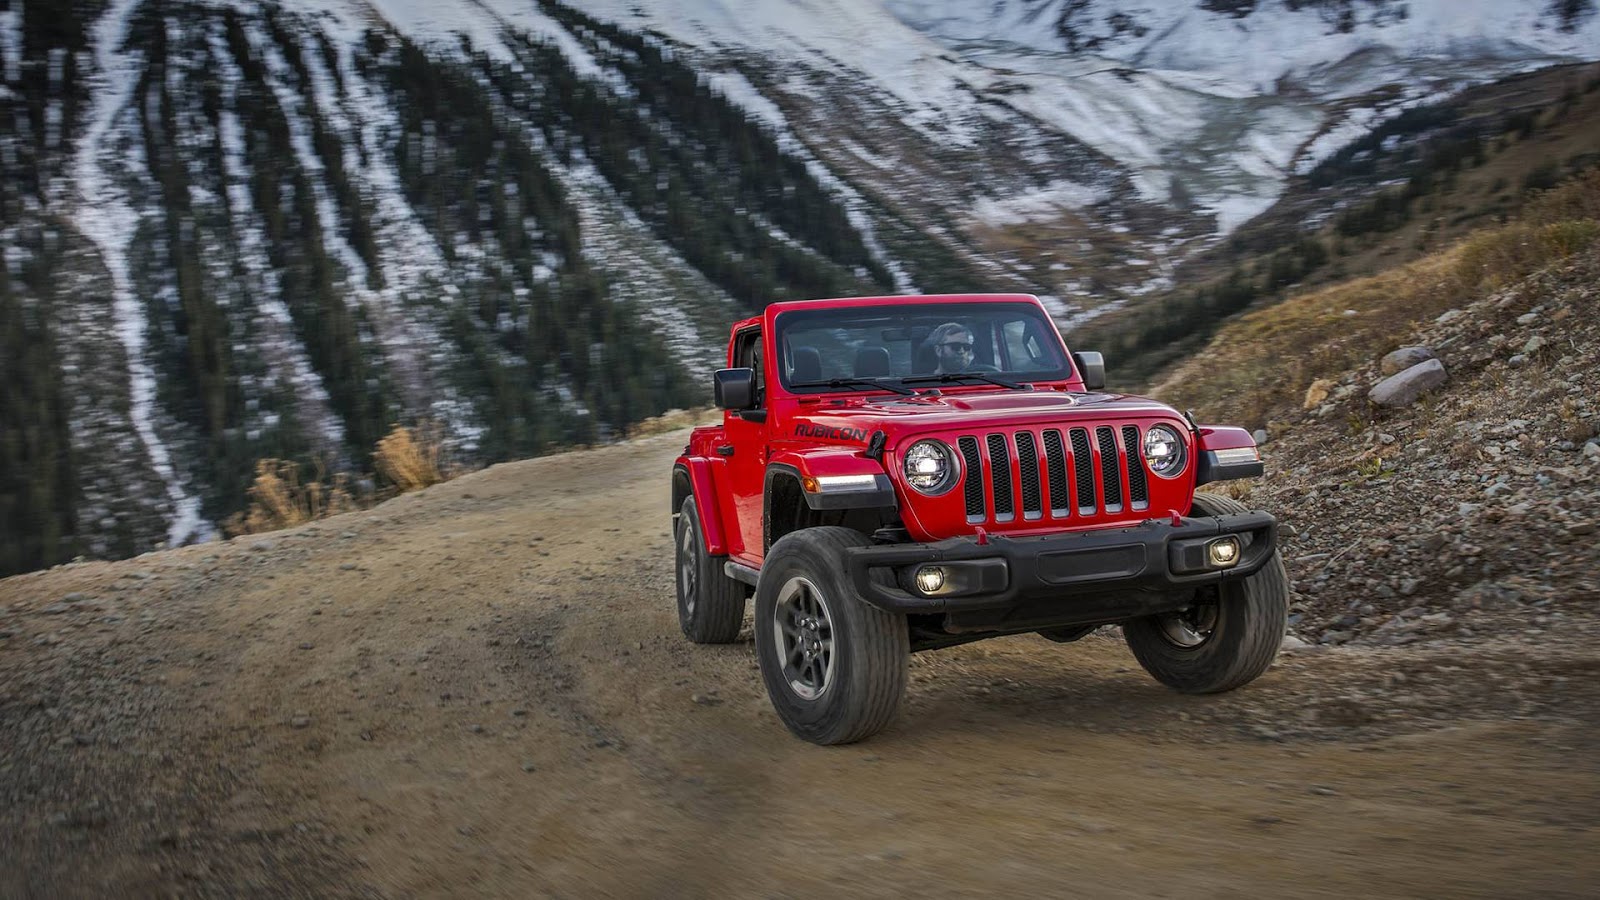 2018 Jeep Wrangler Sheds Weight, Adds Tech And 2.0L Turbo | Carscoops